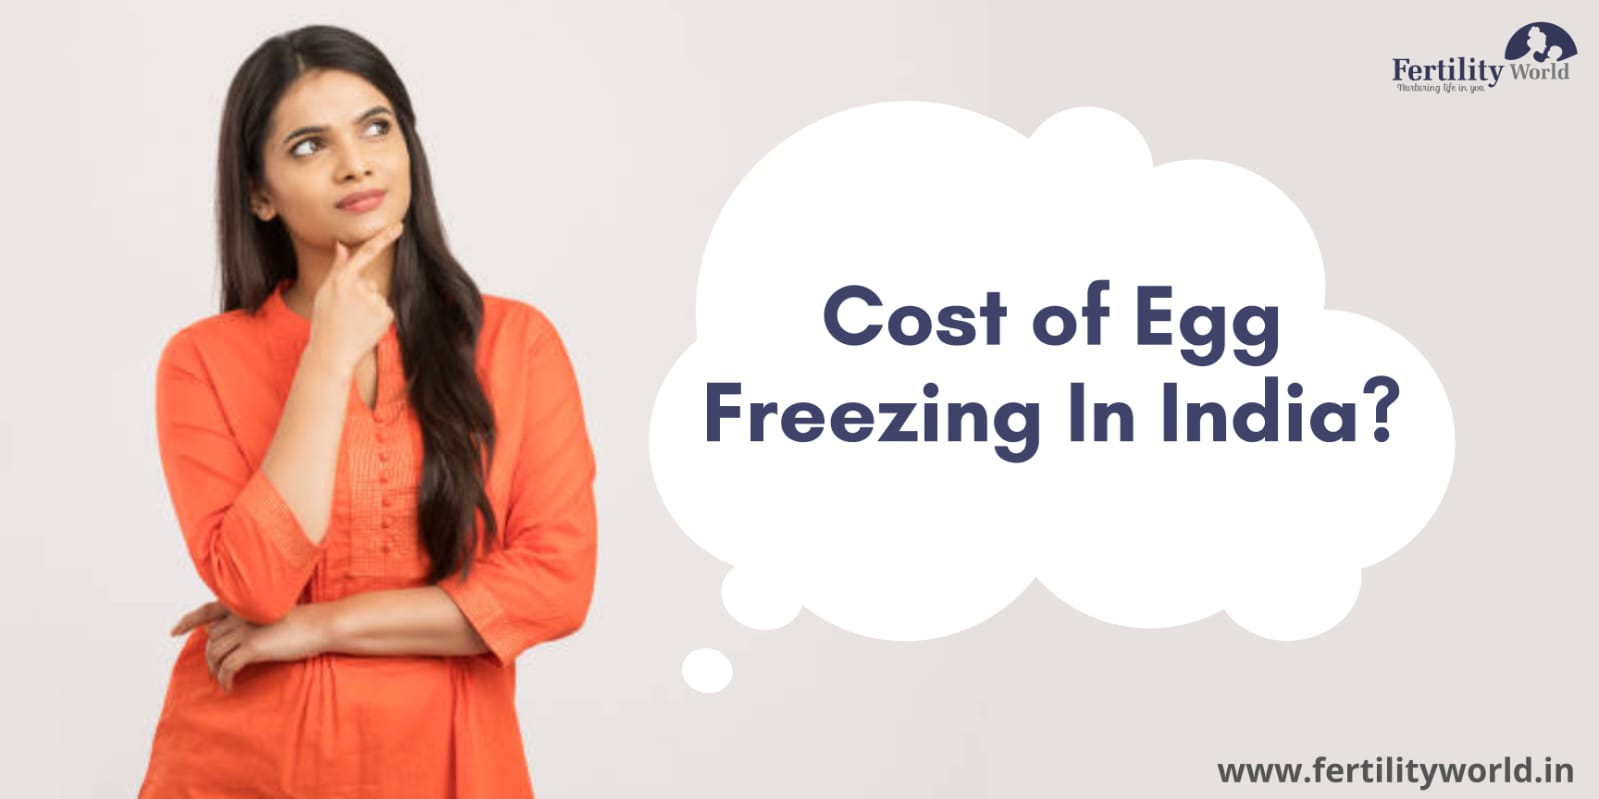 What is the cost of egg freezing in India?